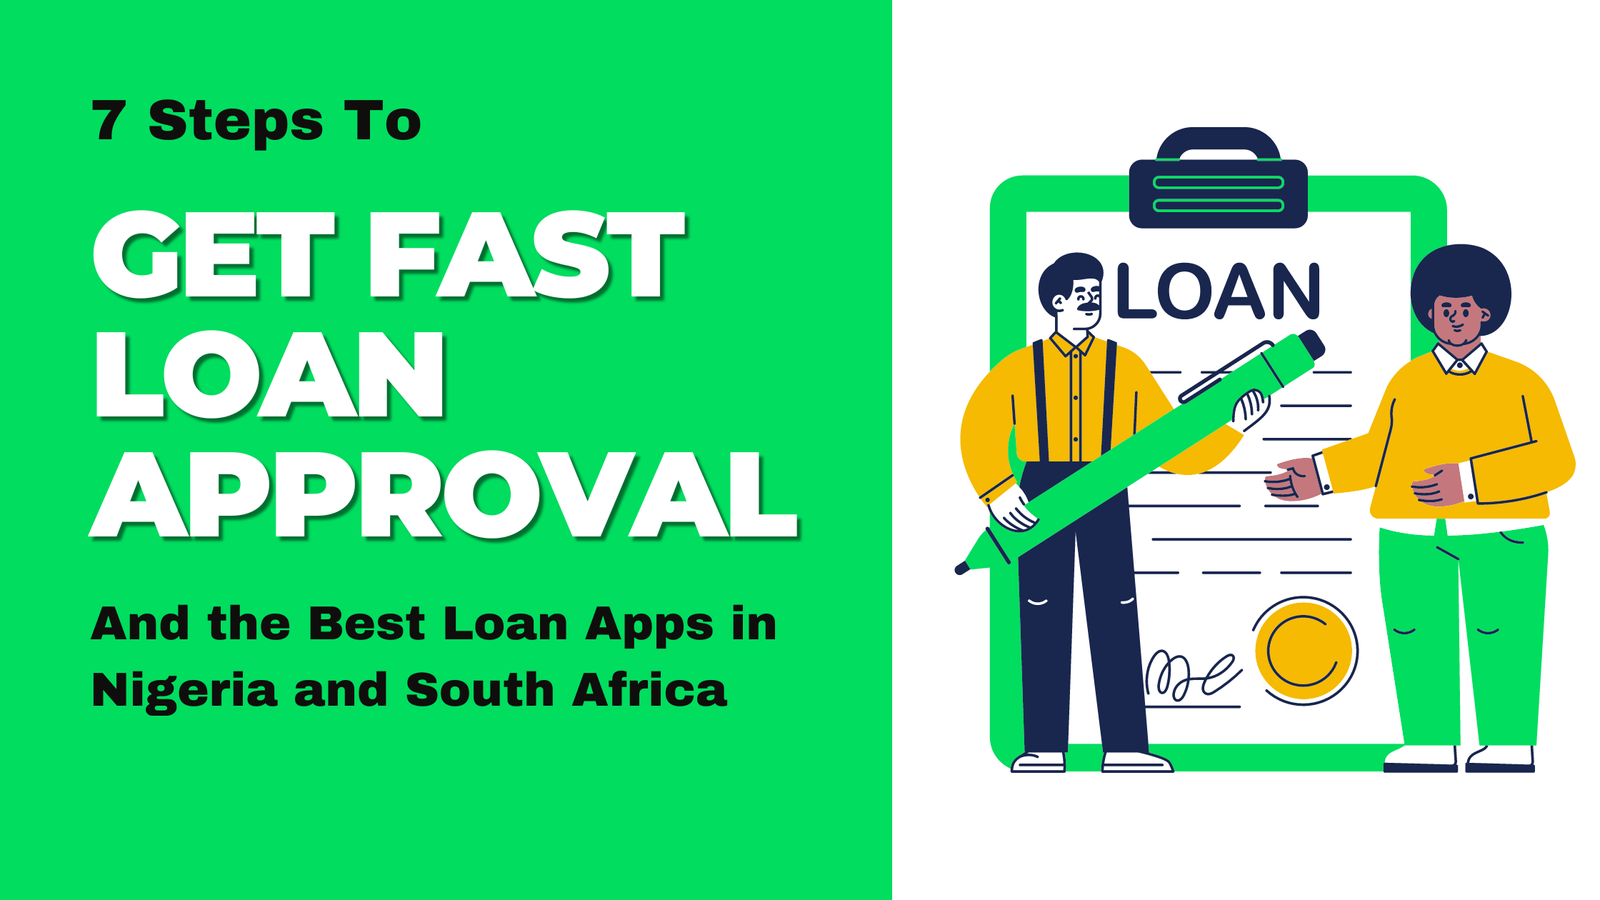 7 Steps to Get Fast Loan Approval and the Best Loan Apps in Nigeria and South Africa